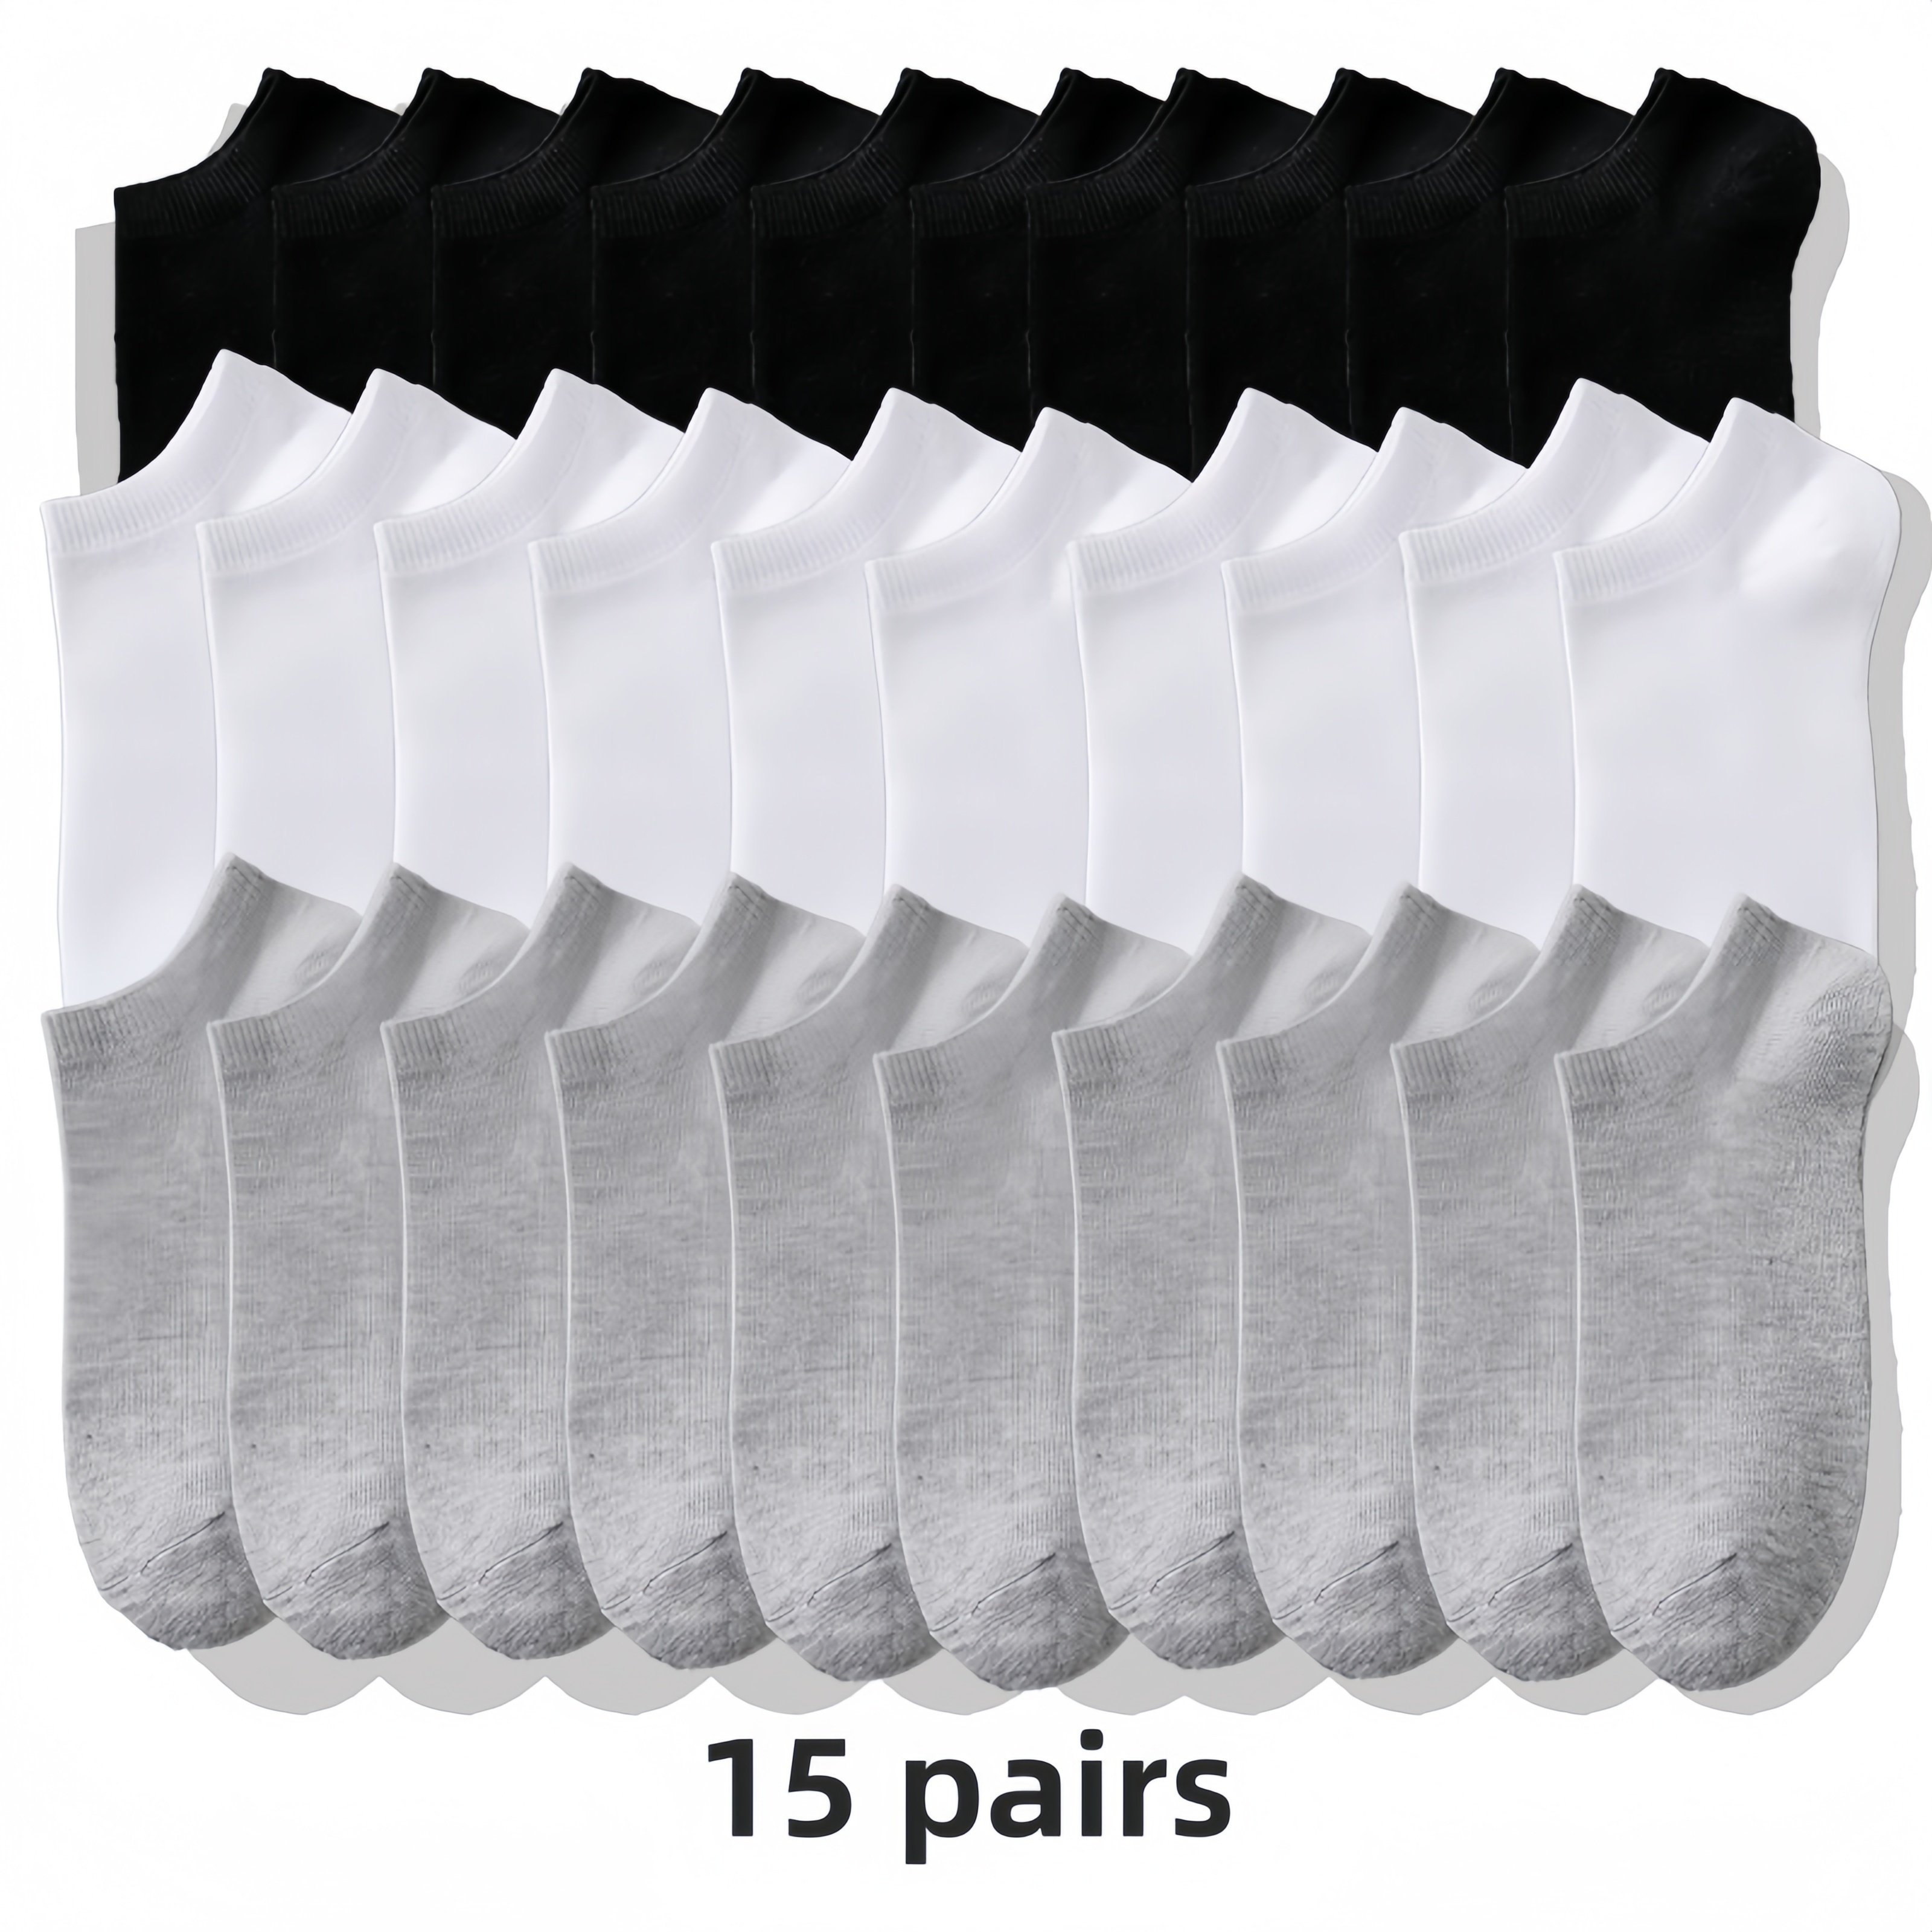 

15 Pairs Of Cotton Socks For Men And Women, Sweat Absorbing And Odor Resistant, Durable Everyday Low-cut Wear For Spring & Summer